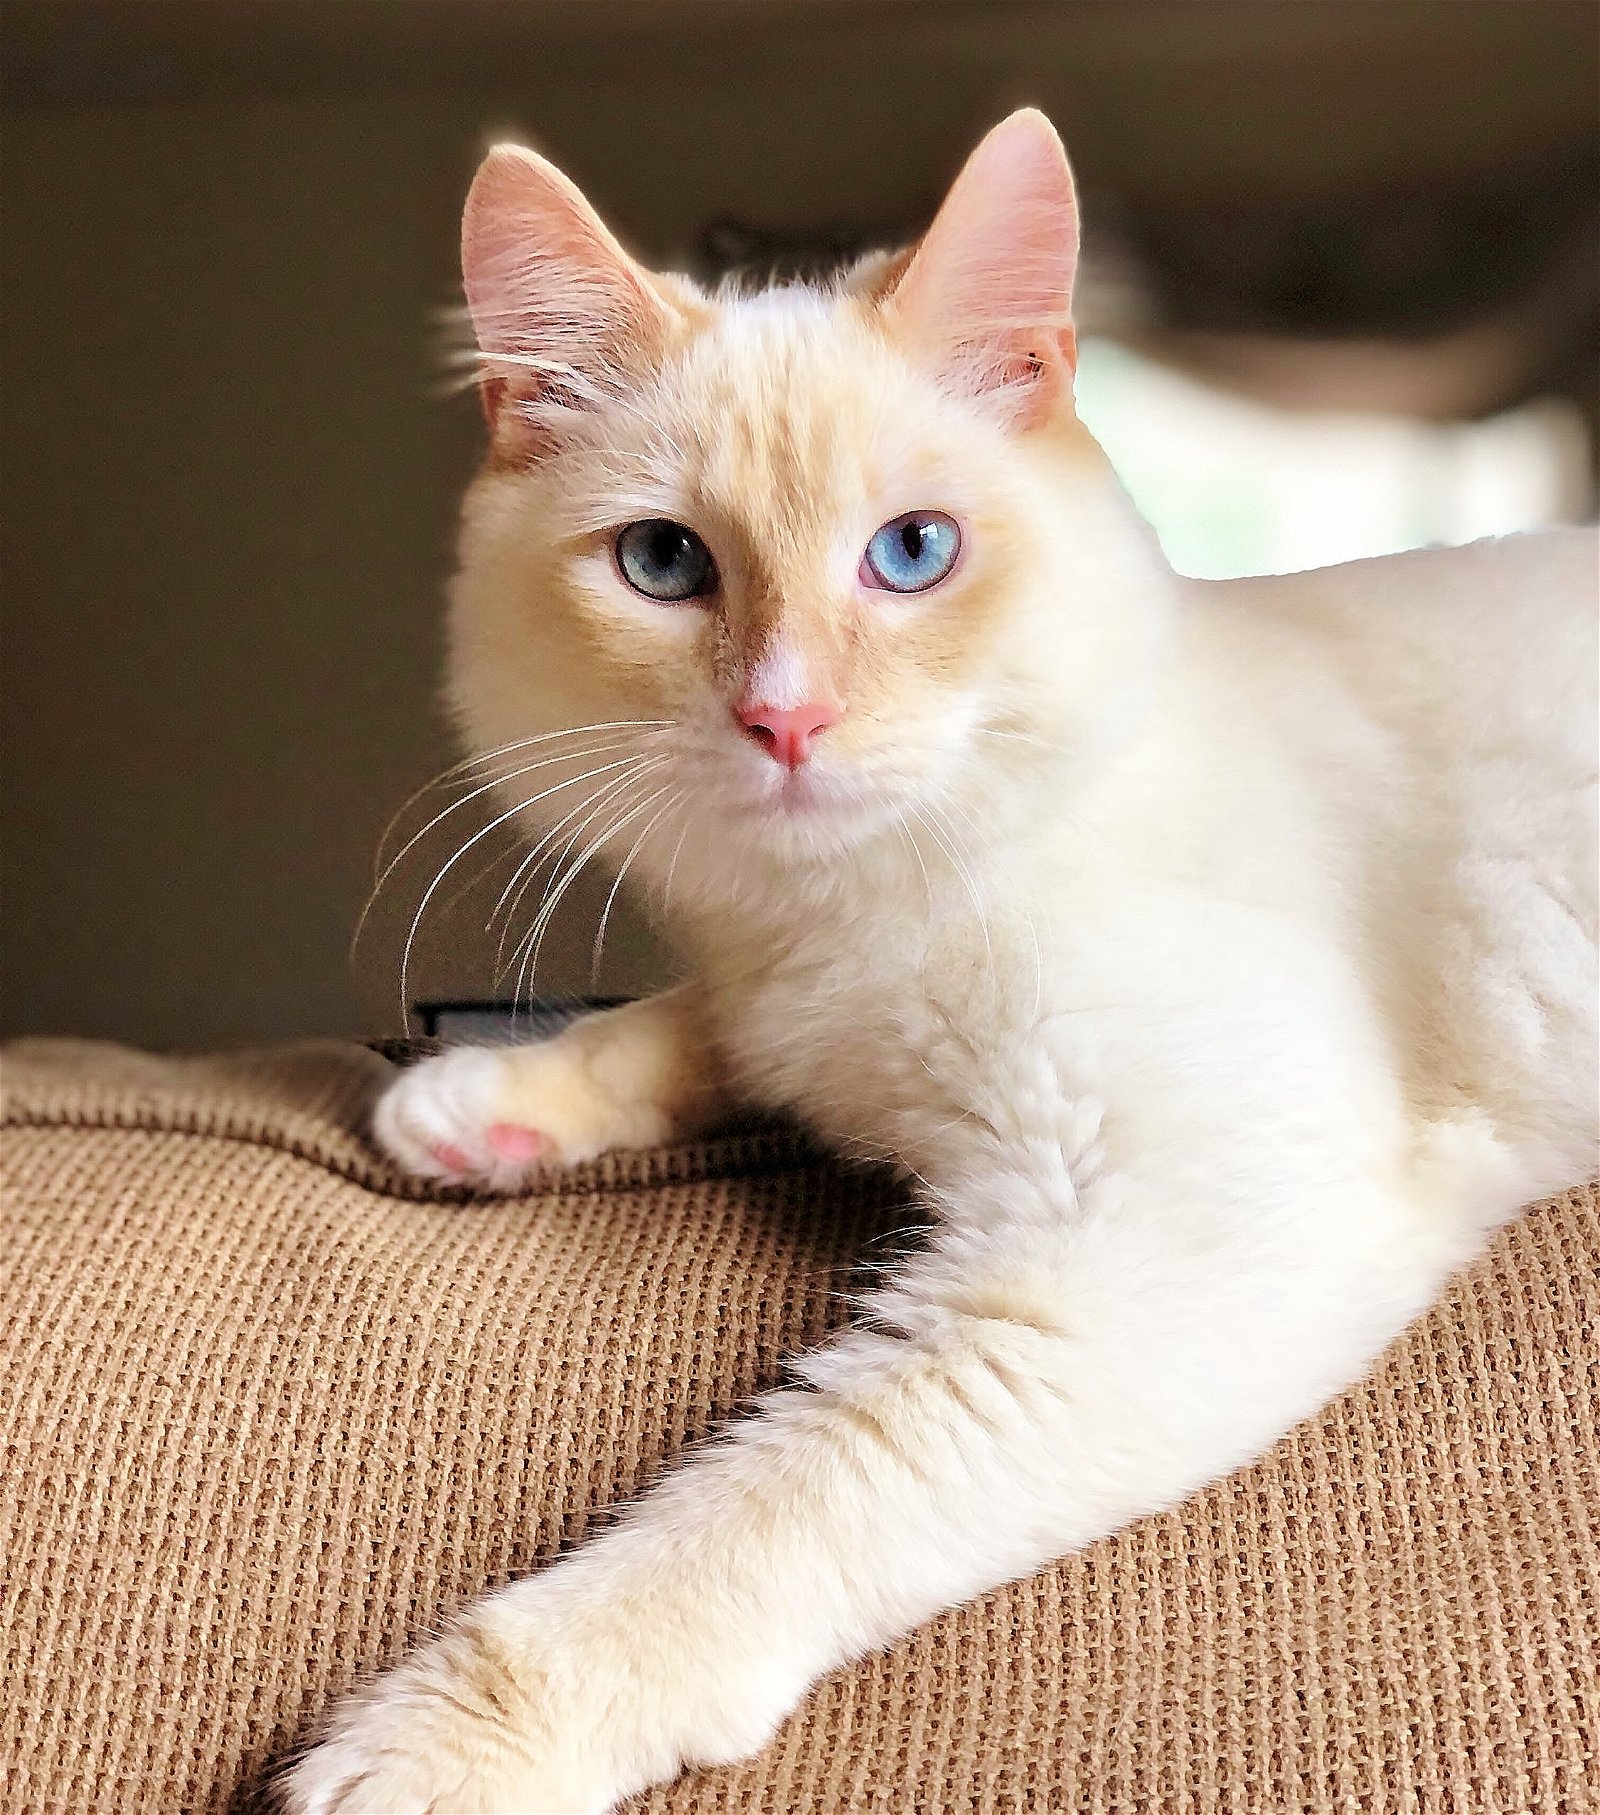 Adopt Puff The Flame Point Siamese From Cats Can Inc In Oviedo Fl